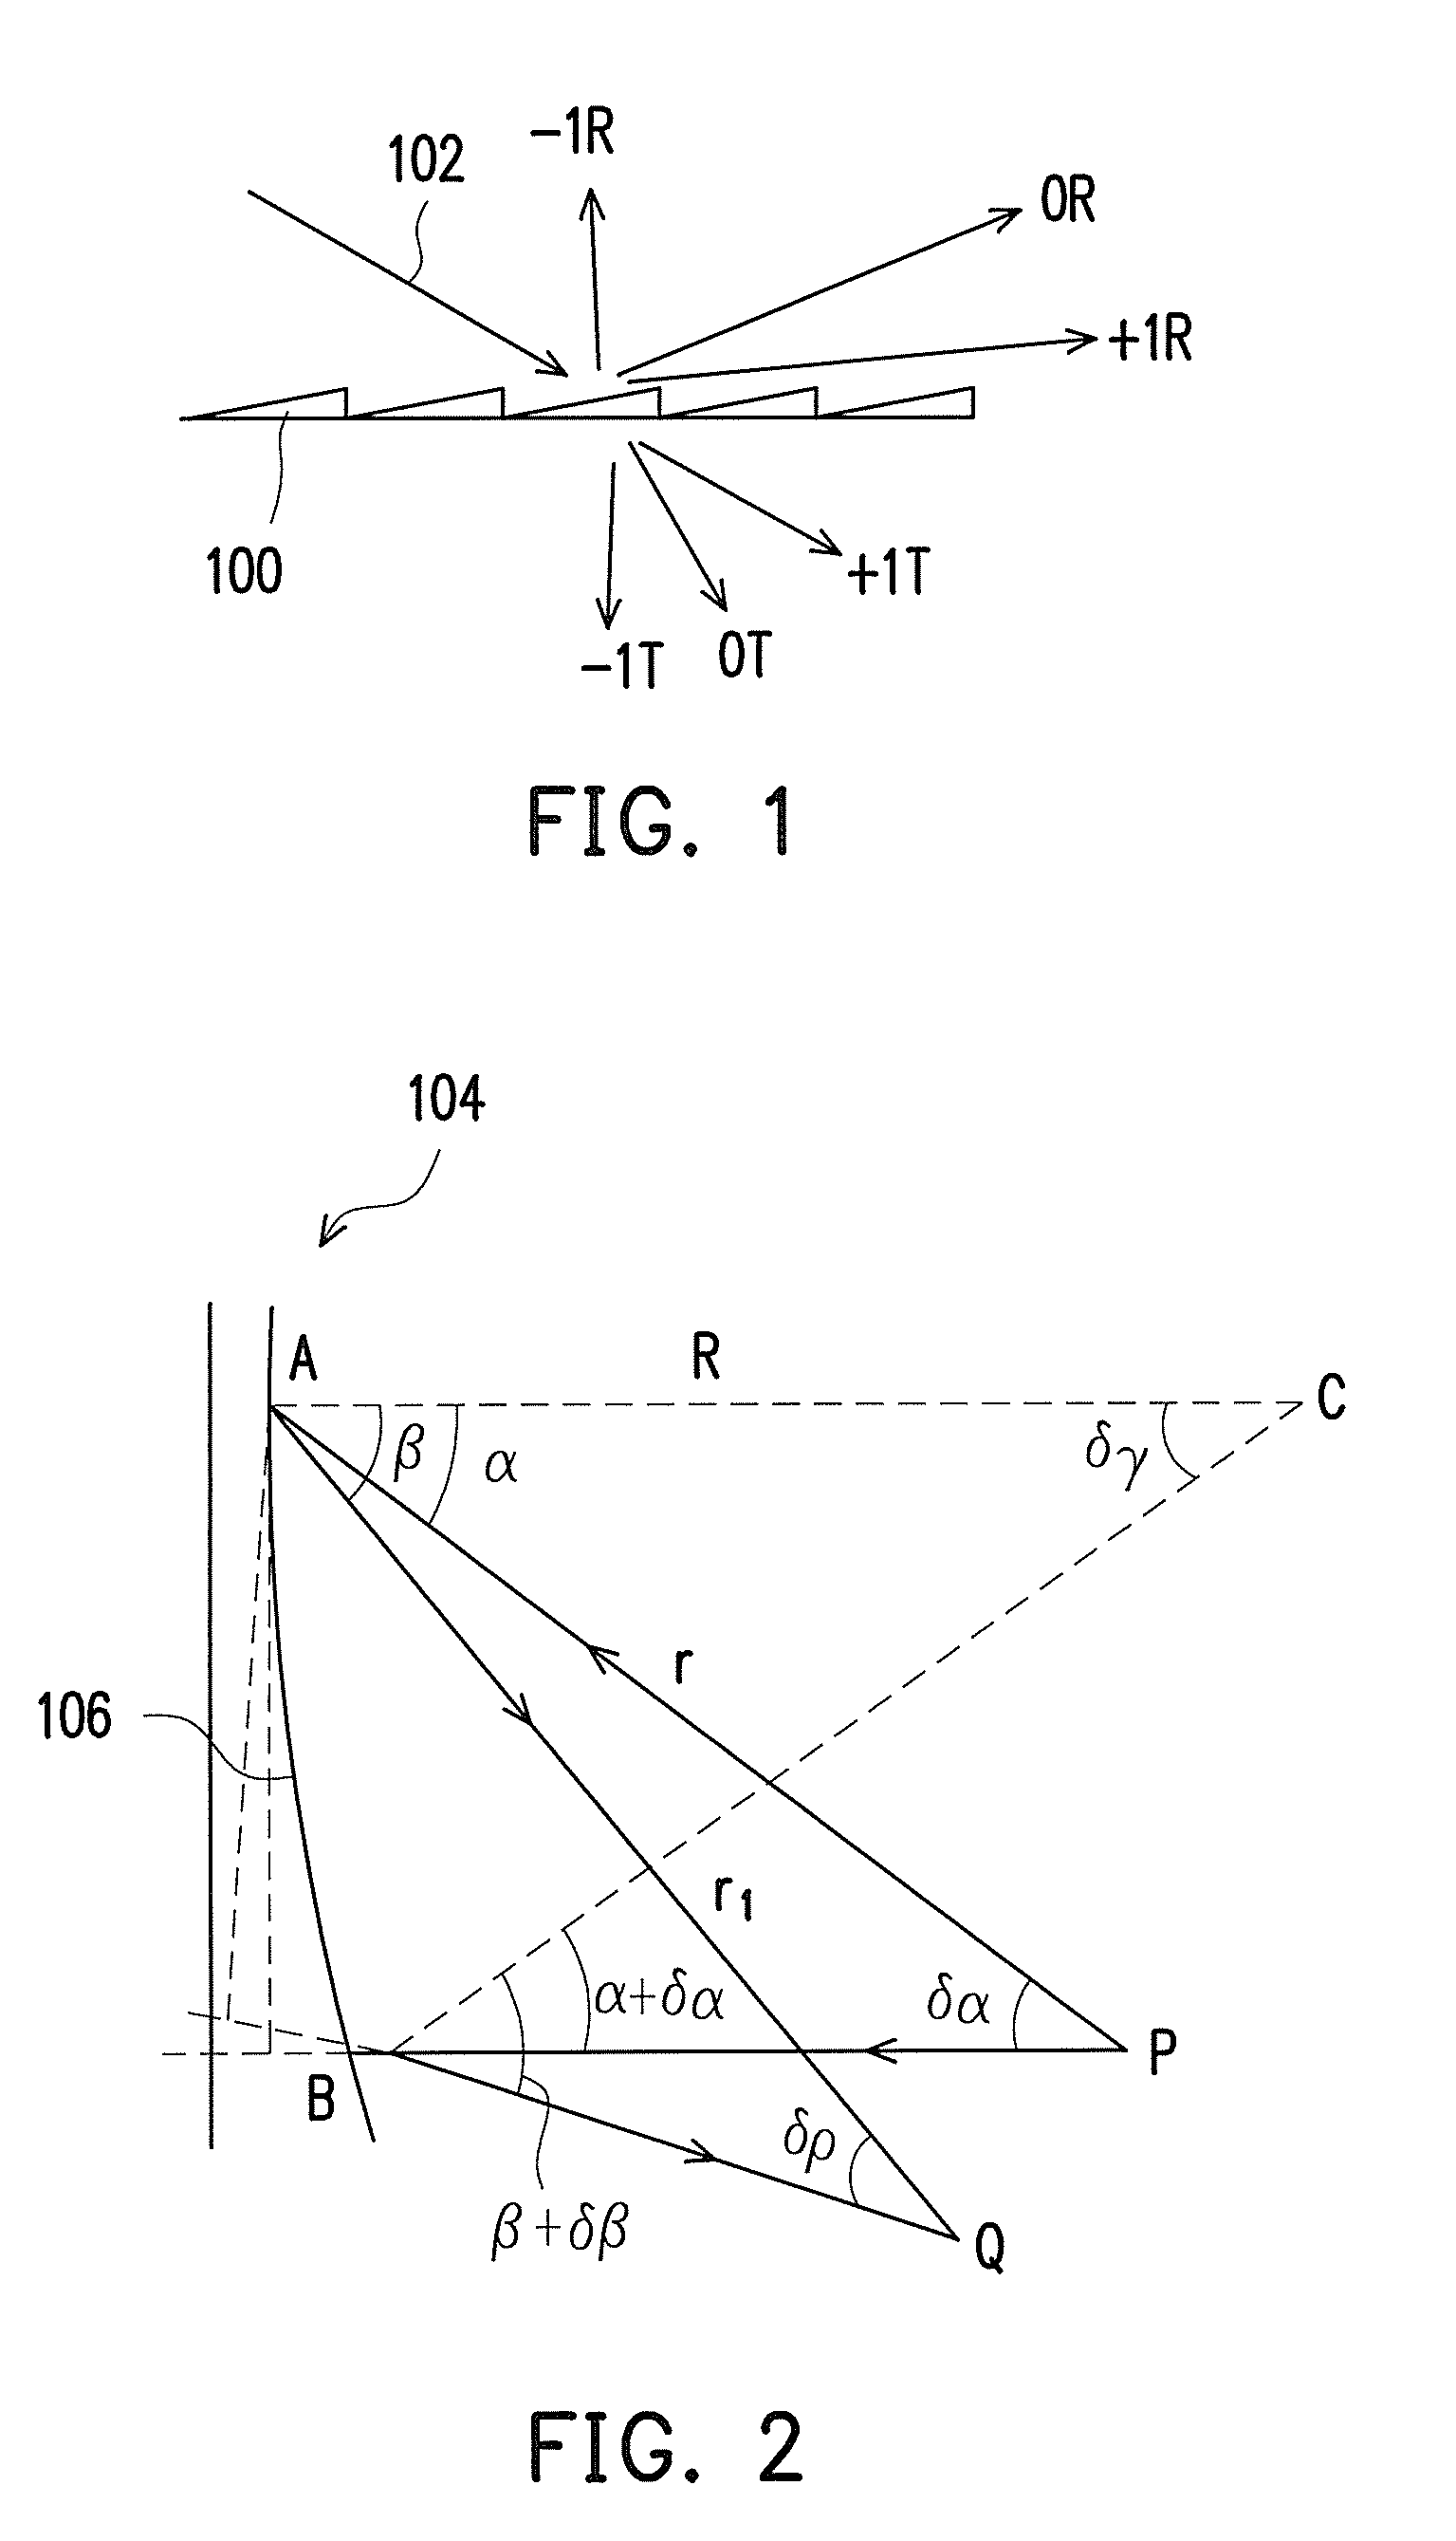 Color dividing optical device and image apparatus with the application